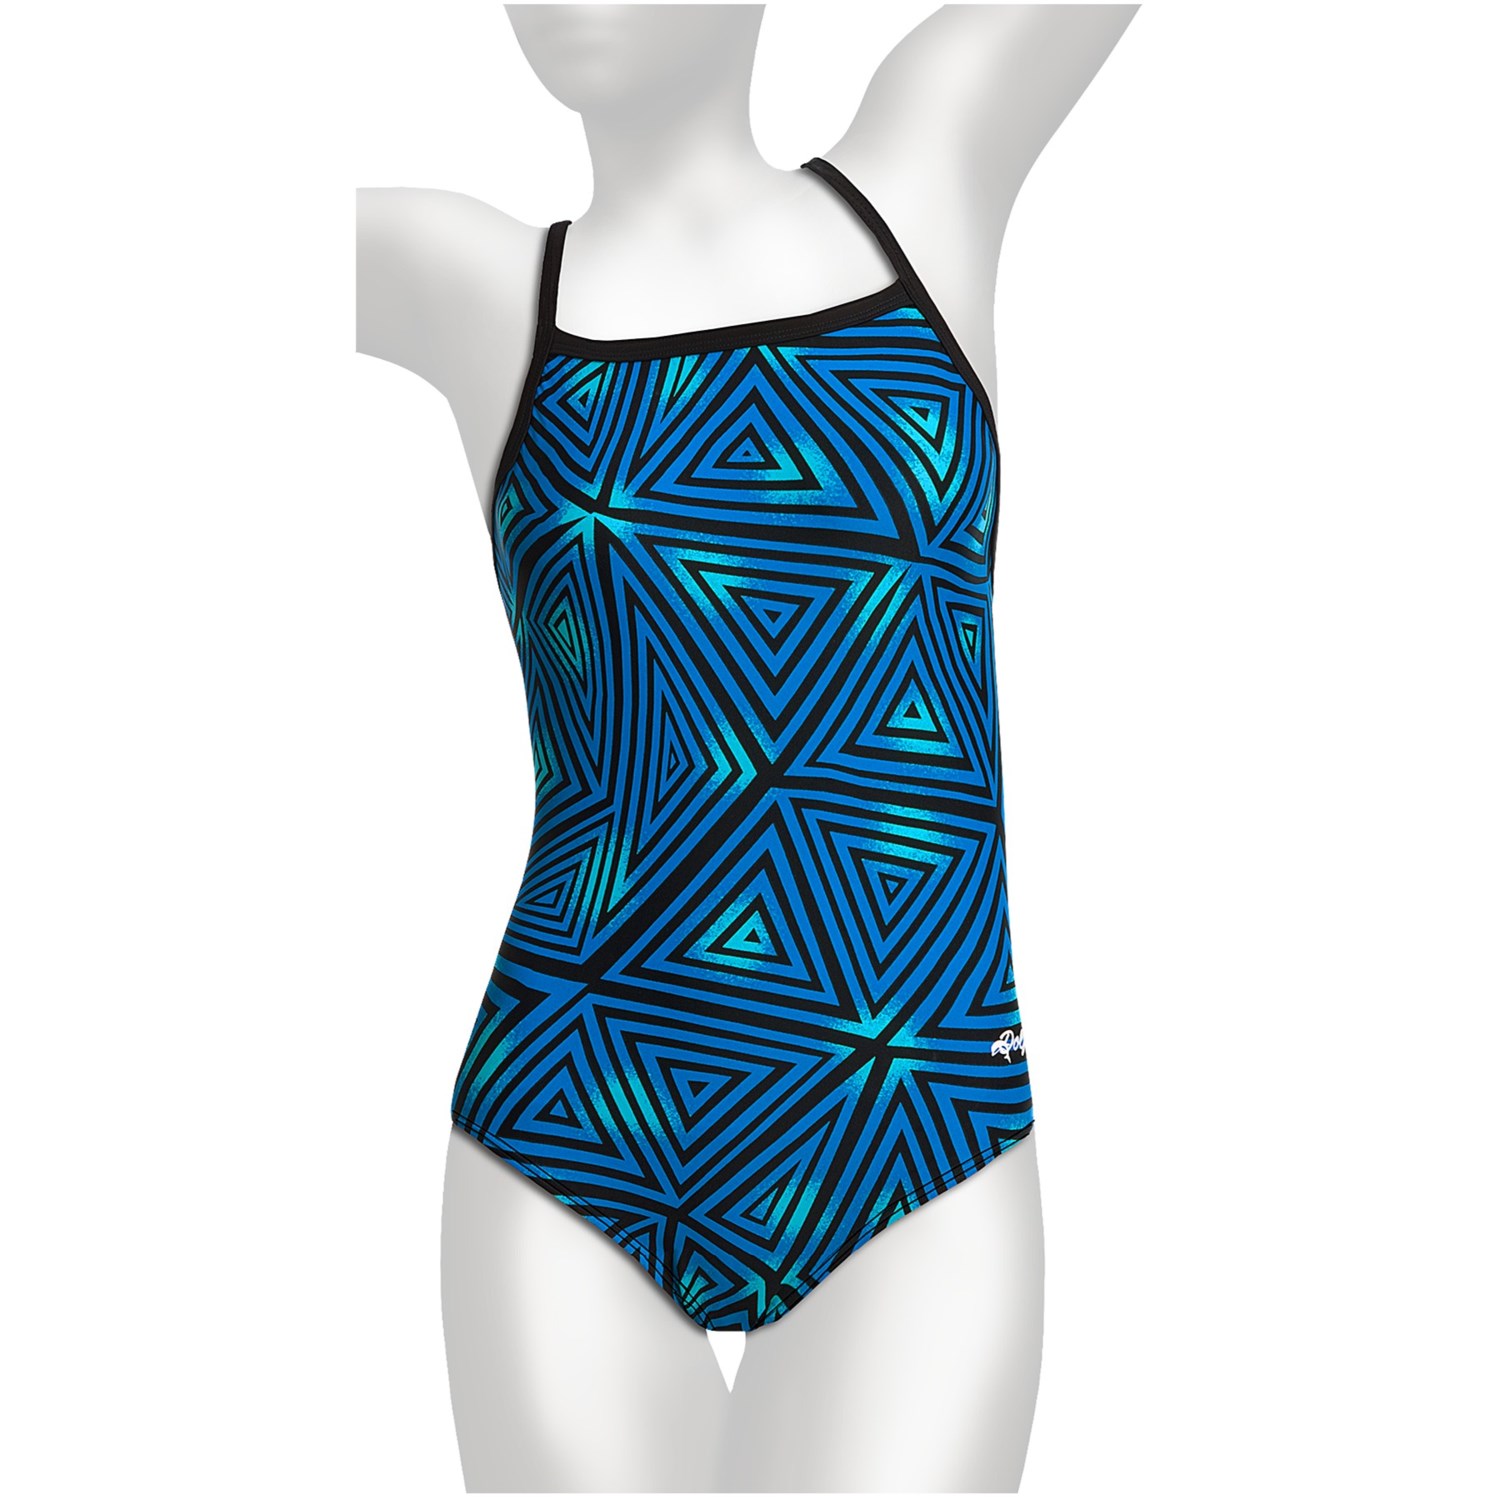 Dolfin Competition Swimsuit - Square Neck (For Women) - Save 37%